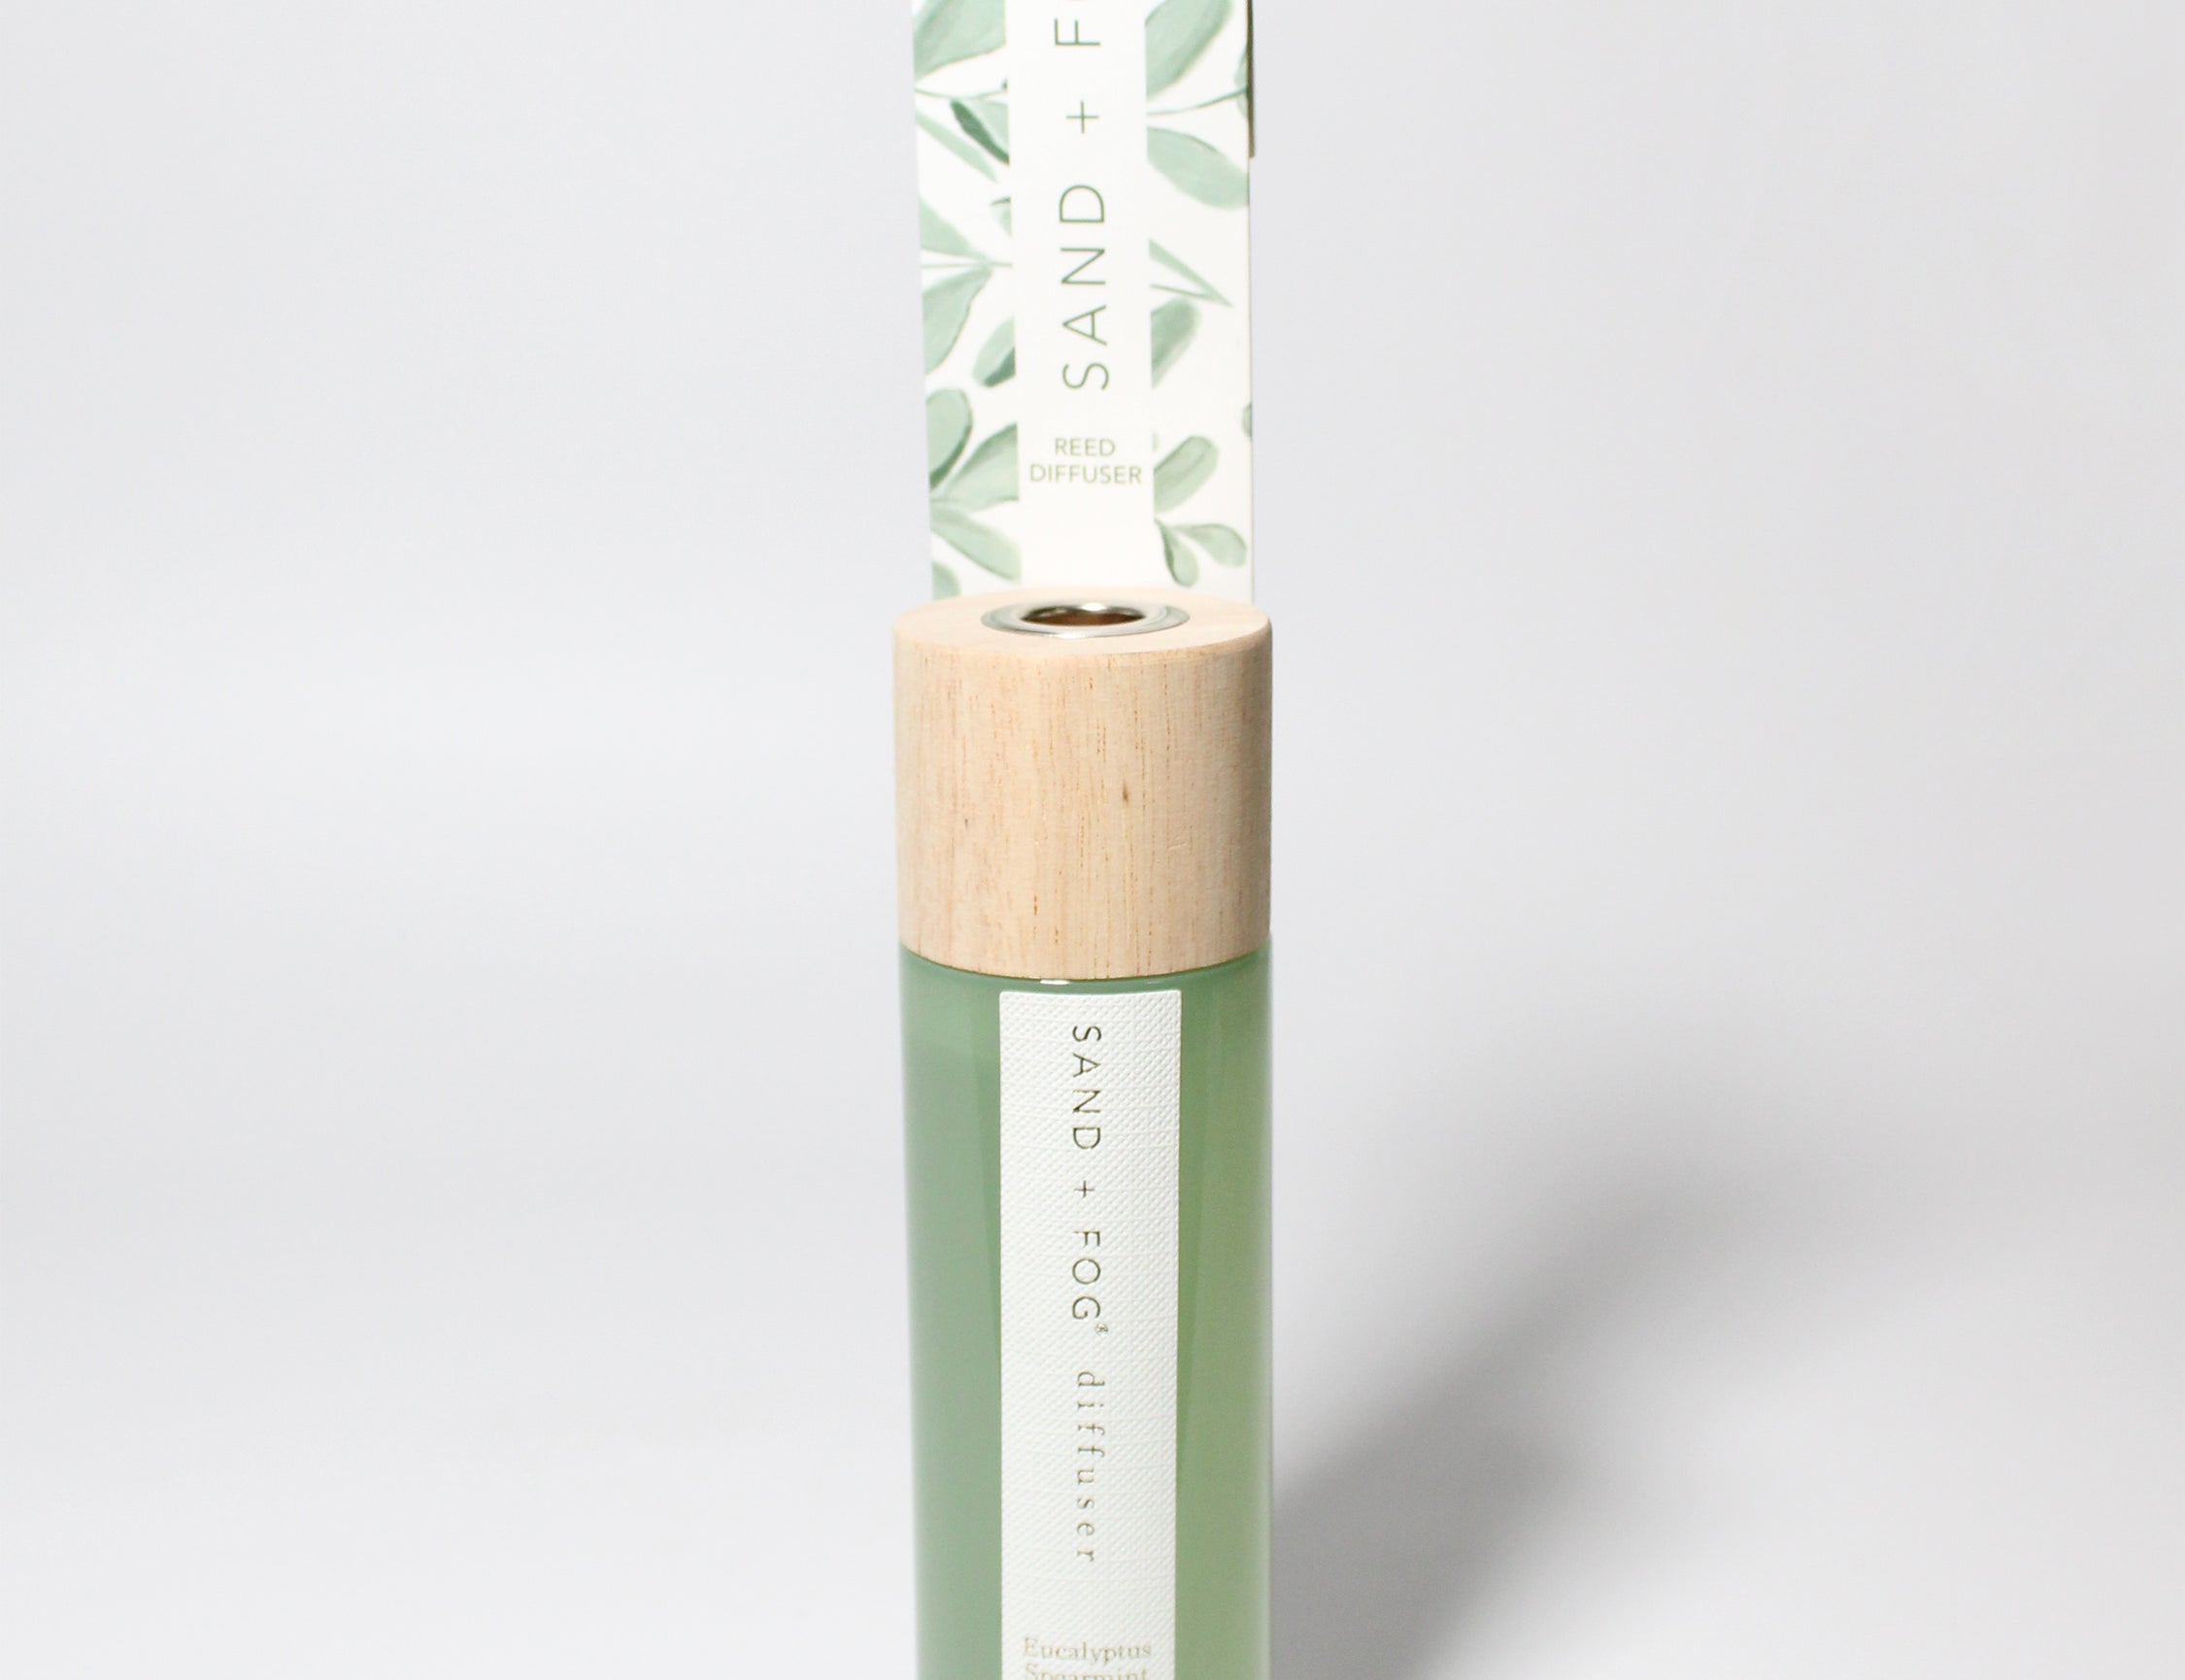 Eucalyptus Spearmint reed diffuser Dusty Sage Glass with Wood top